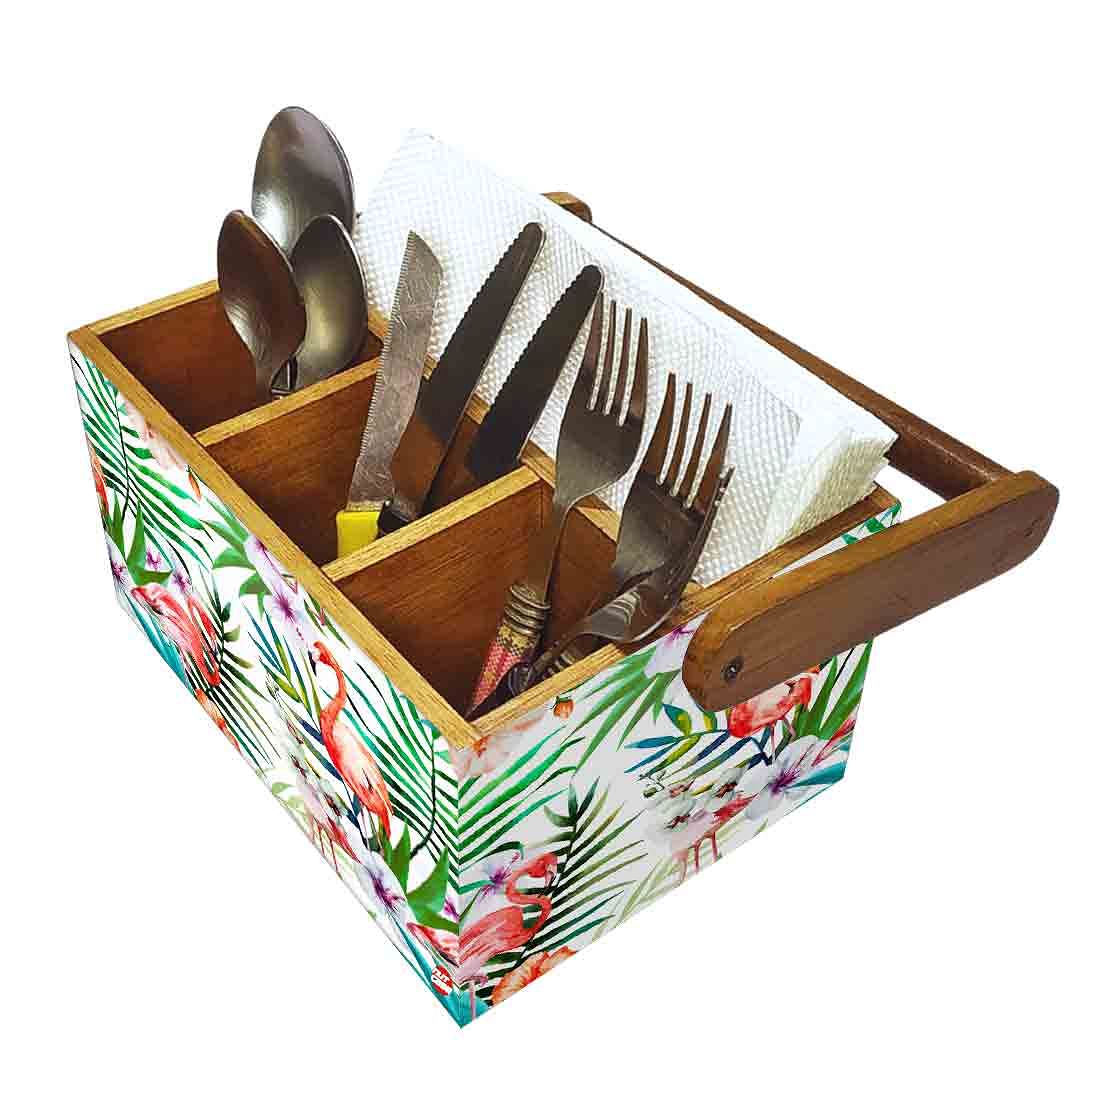 Cutlery Stand for Dining Table Forks Knives & Spoons Organizer - Swan and Leaves Nutcase